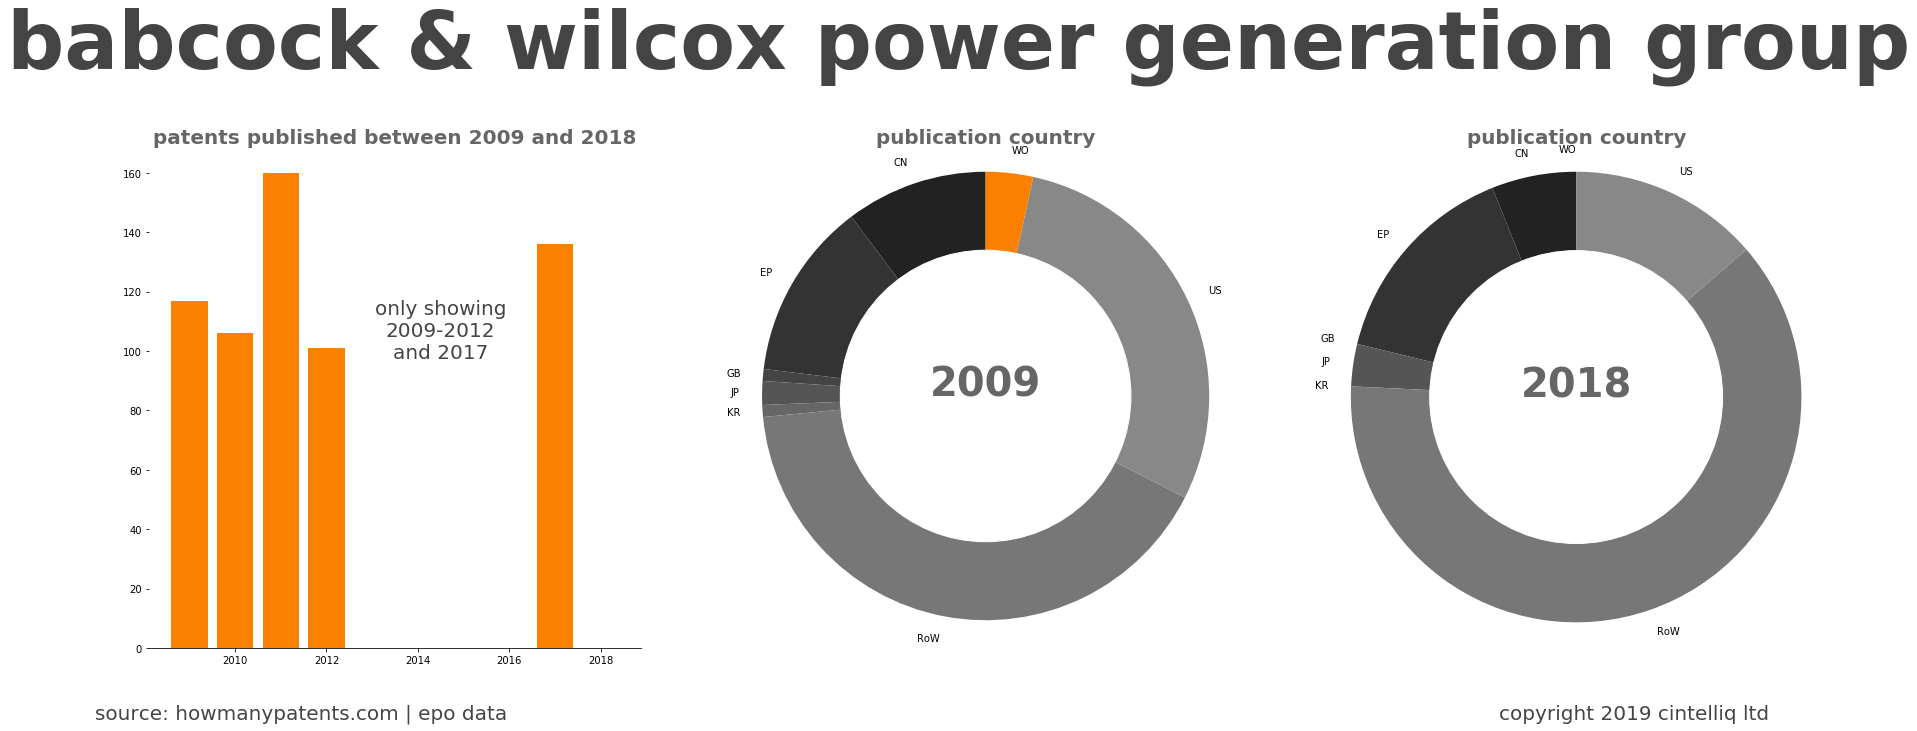 summary of patents for Babcock & Wilcox Power Generation Group